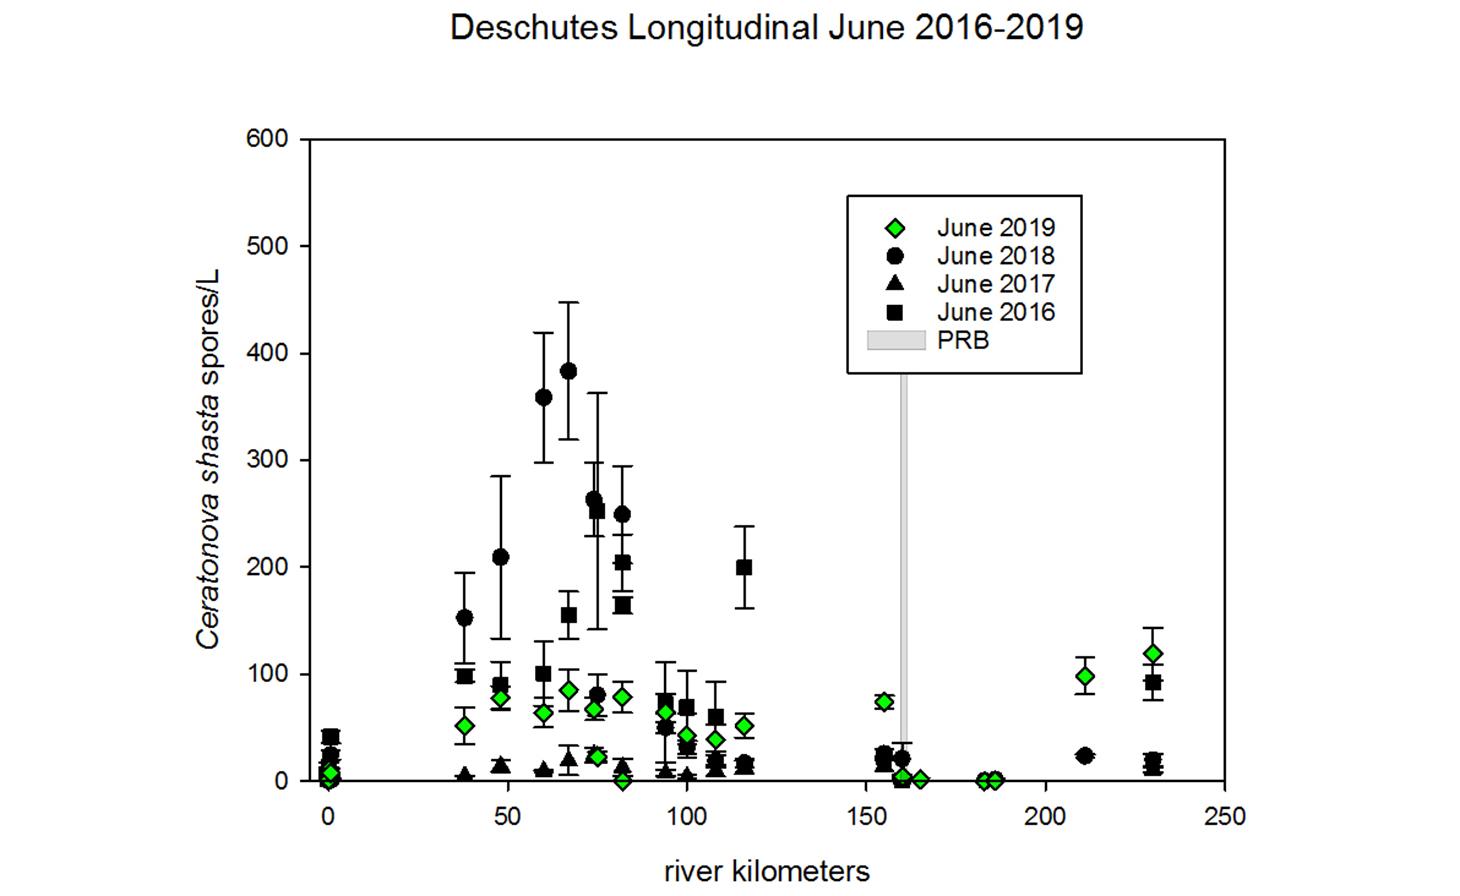 An image of a scatterplot chart comparing Creatonova shasta spores/L with river kilometers from 2016-2019 in June.